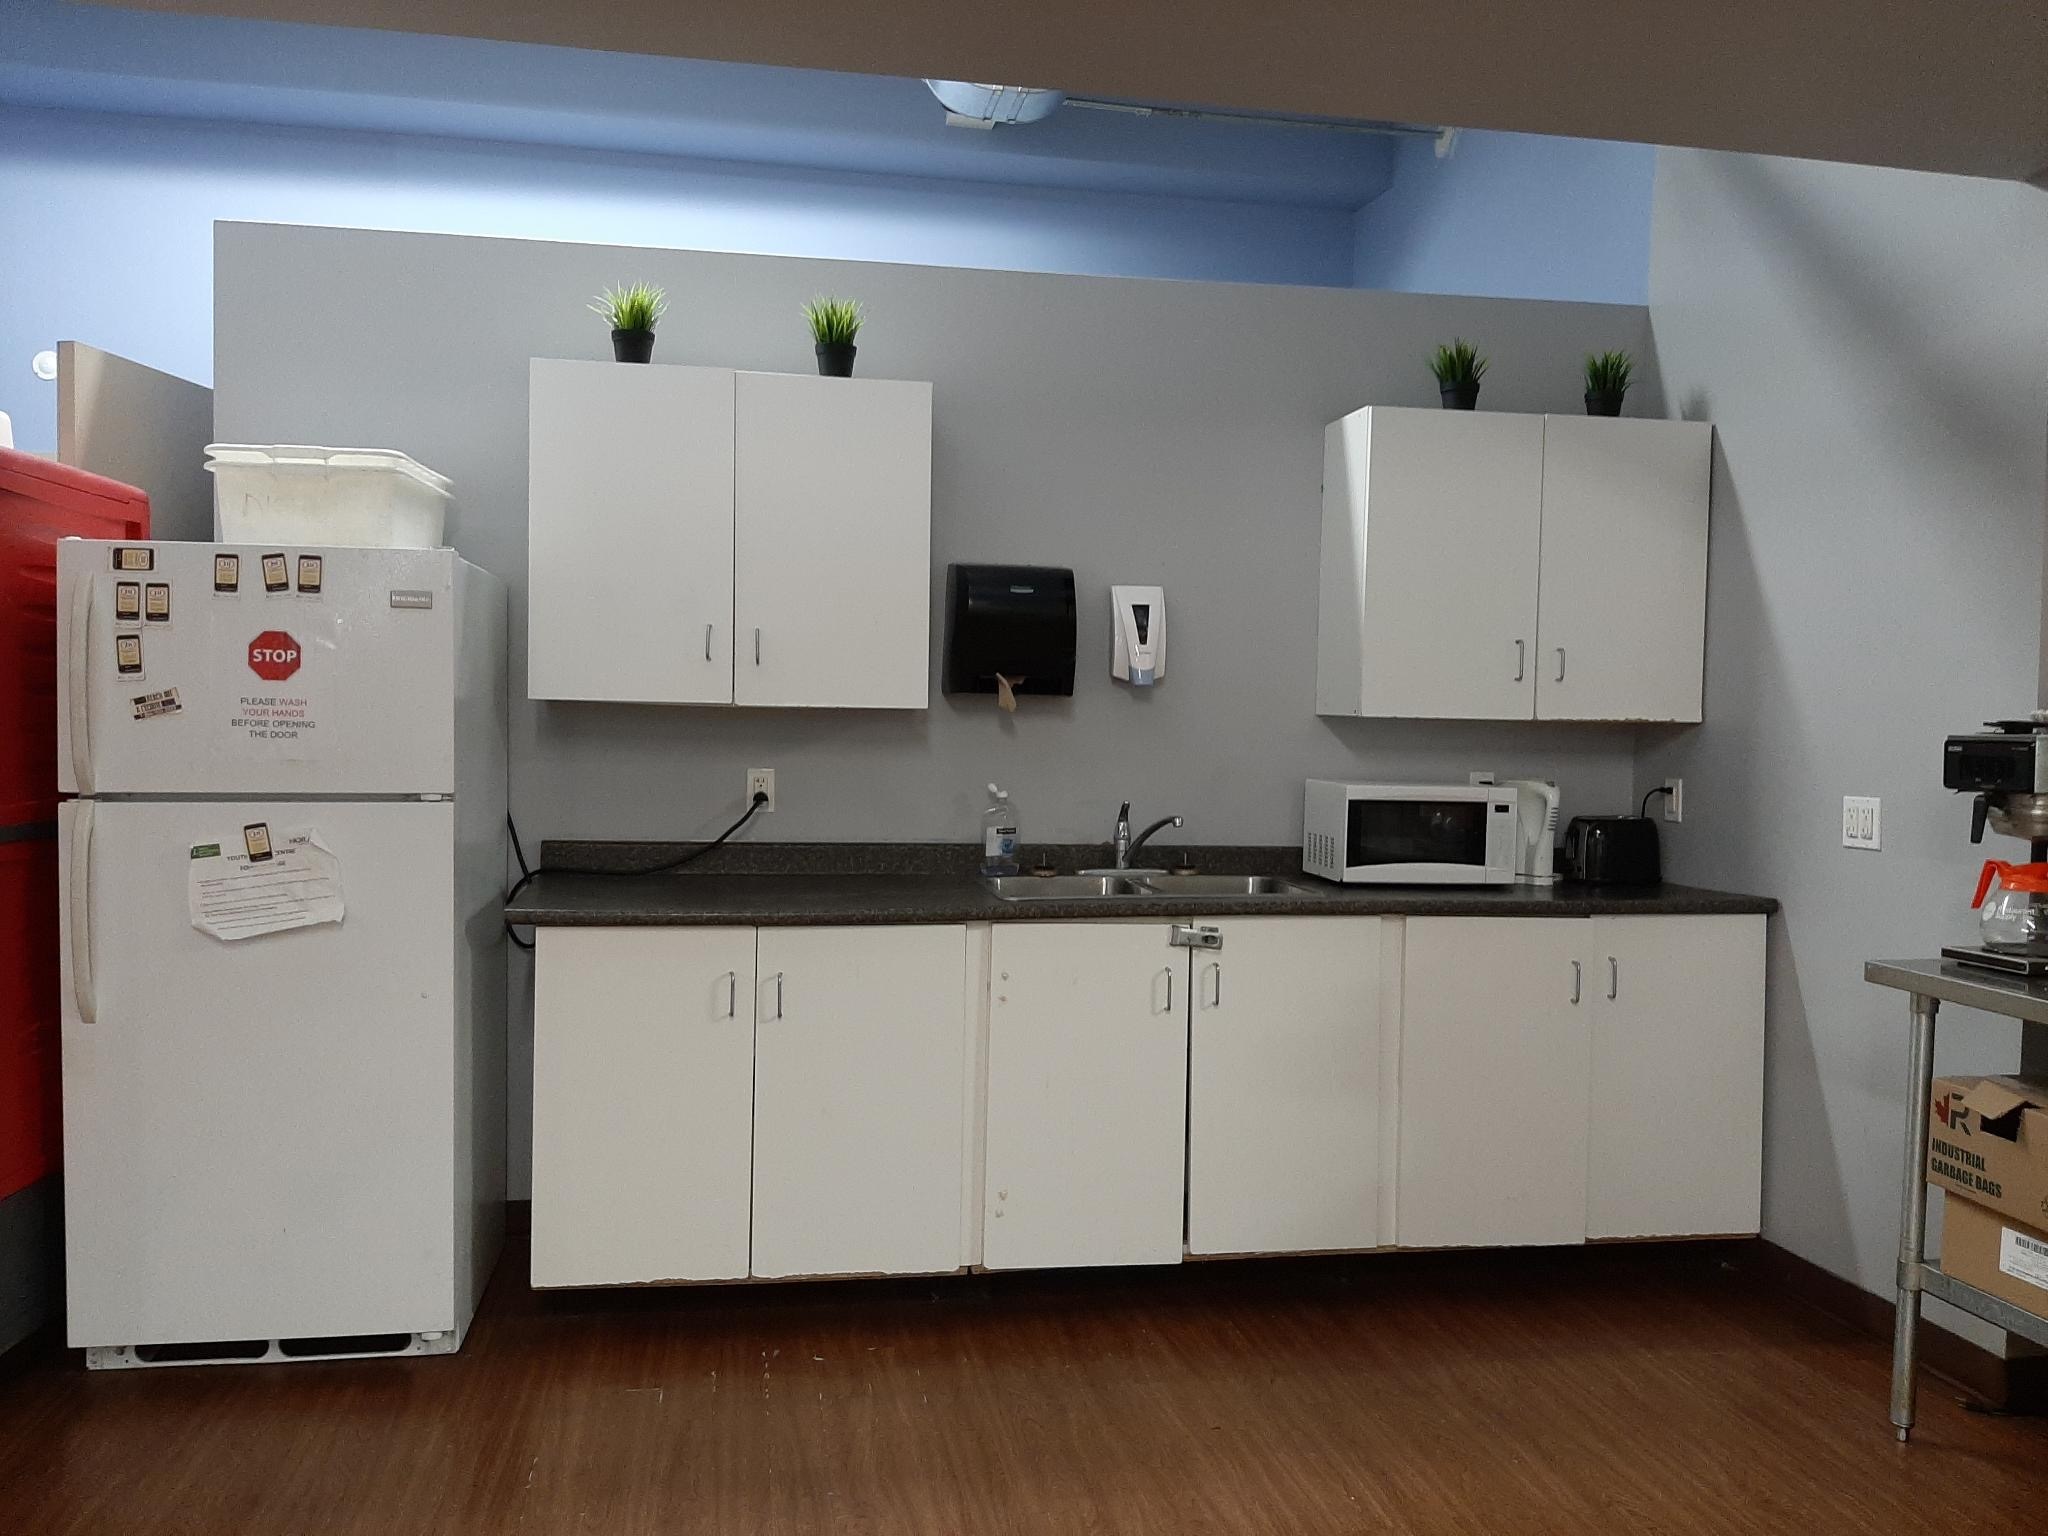 Youth can use the kitchen at the Youth Action Centre